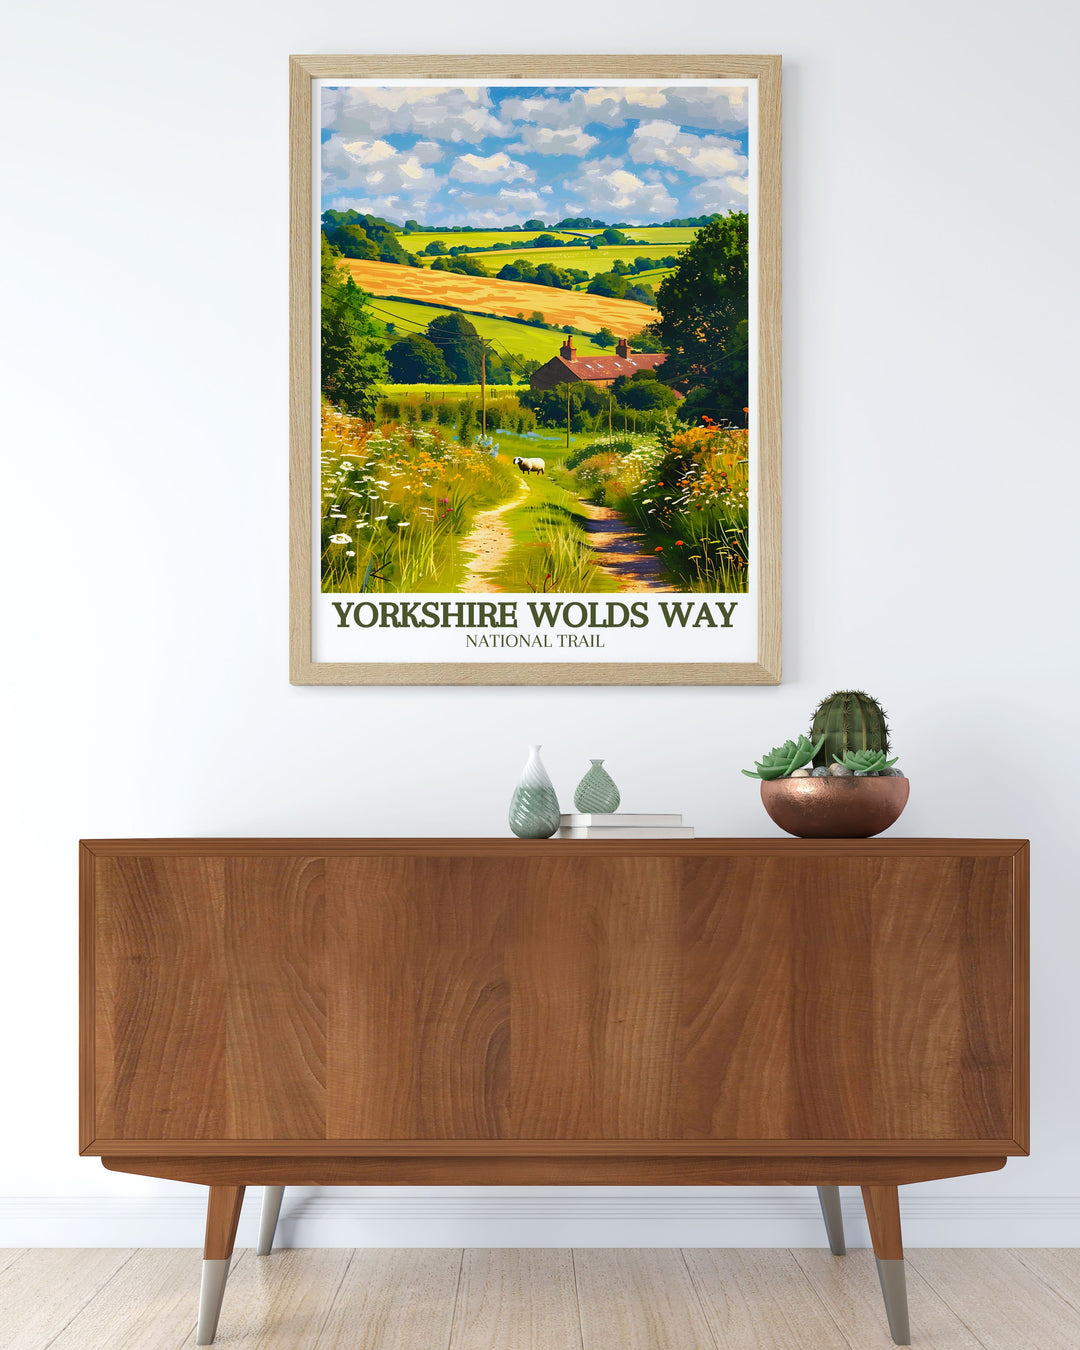 Exquisite canvas art depicting the scenic trails of the Yorkshire Wolds Way. This print highlights the trails picturesque landscapes, from rolling hills and ancient woodlands to vibrant wildflower meadows, making it an ideal addition to your home decor, celebrating the natural beauty of the UK.